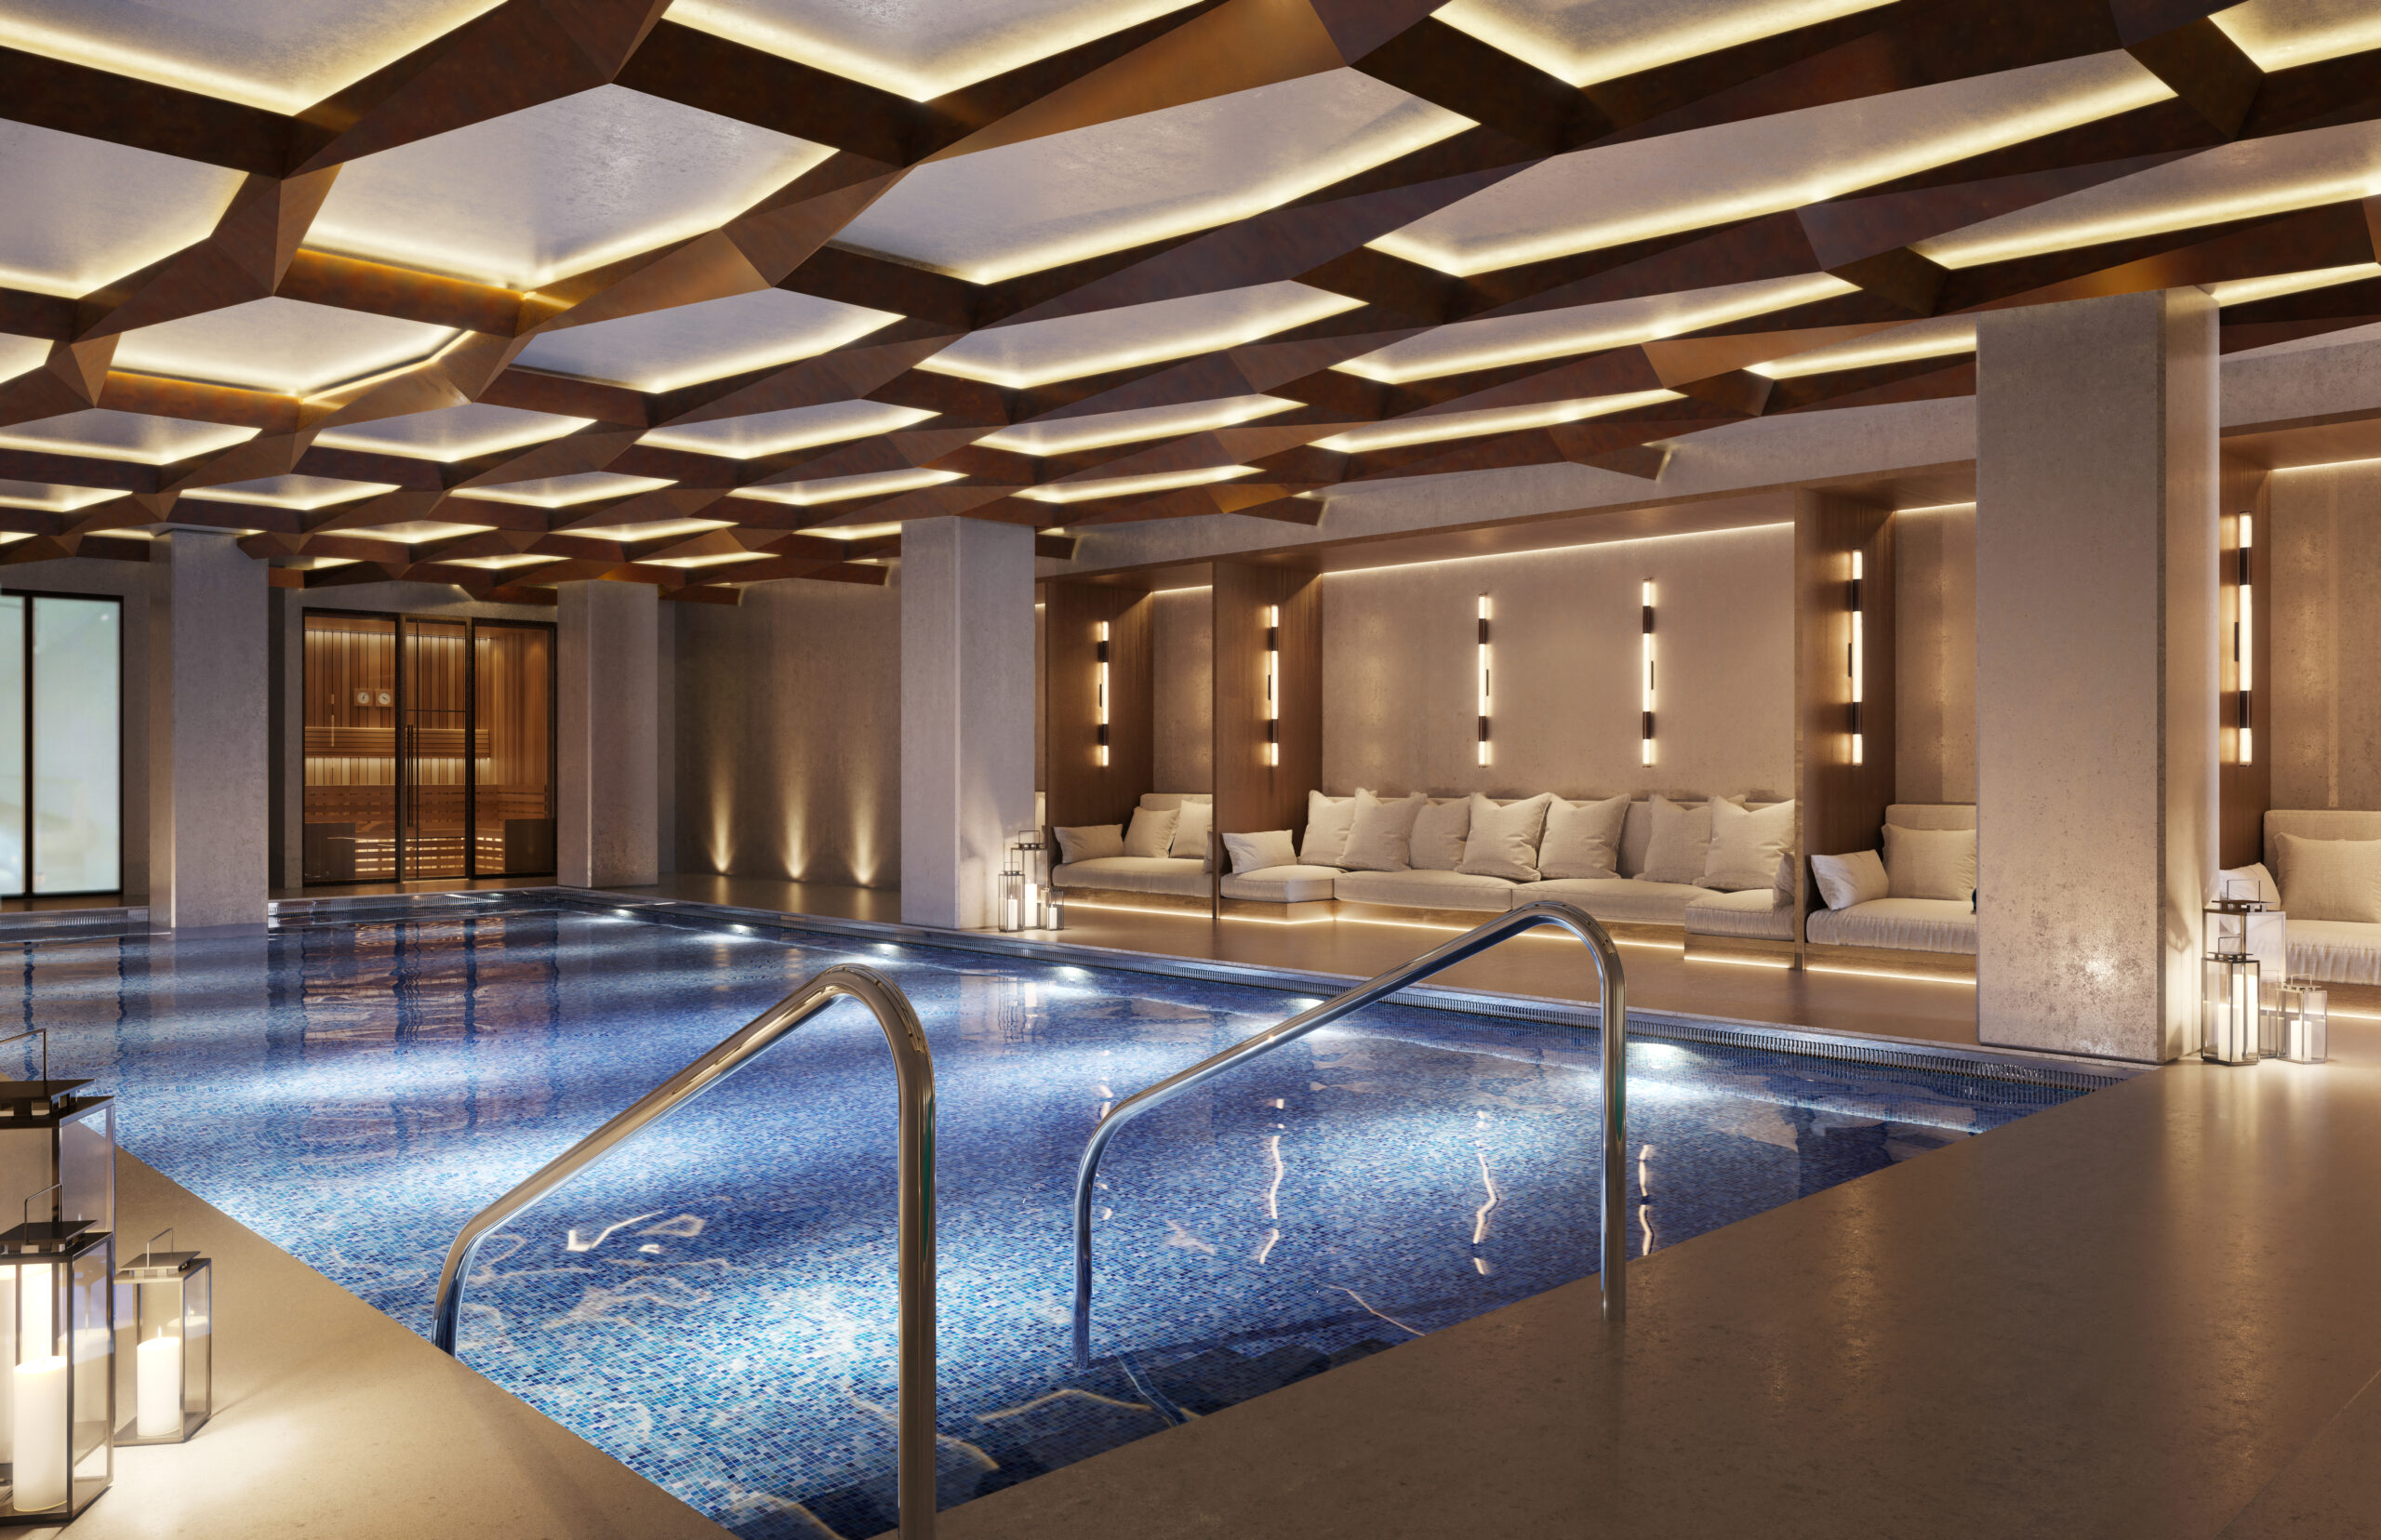 A pool at the W Hotel and Residences at St Michael's, Manchester.